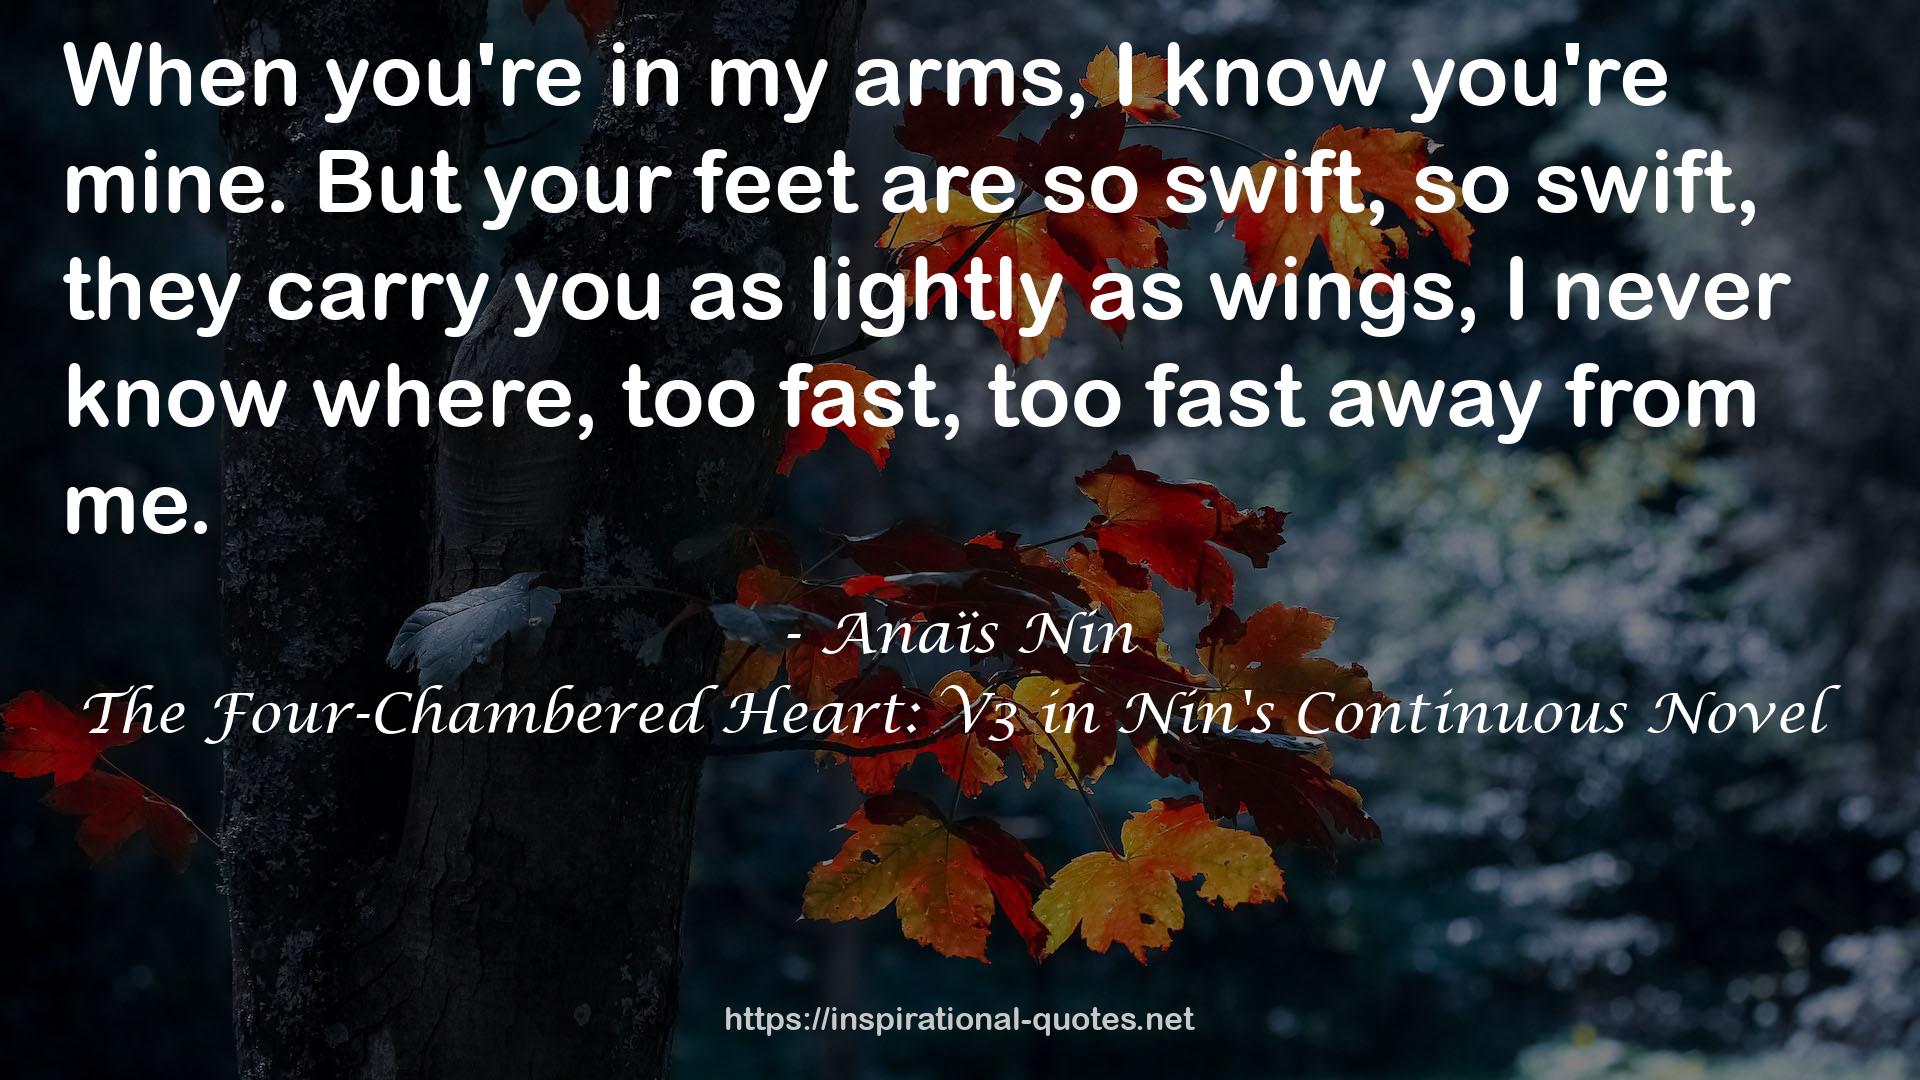 The Four-Chambered Heart: V3 in Nin's Continuous Novel QUOTES